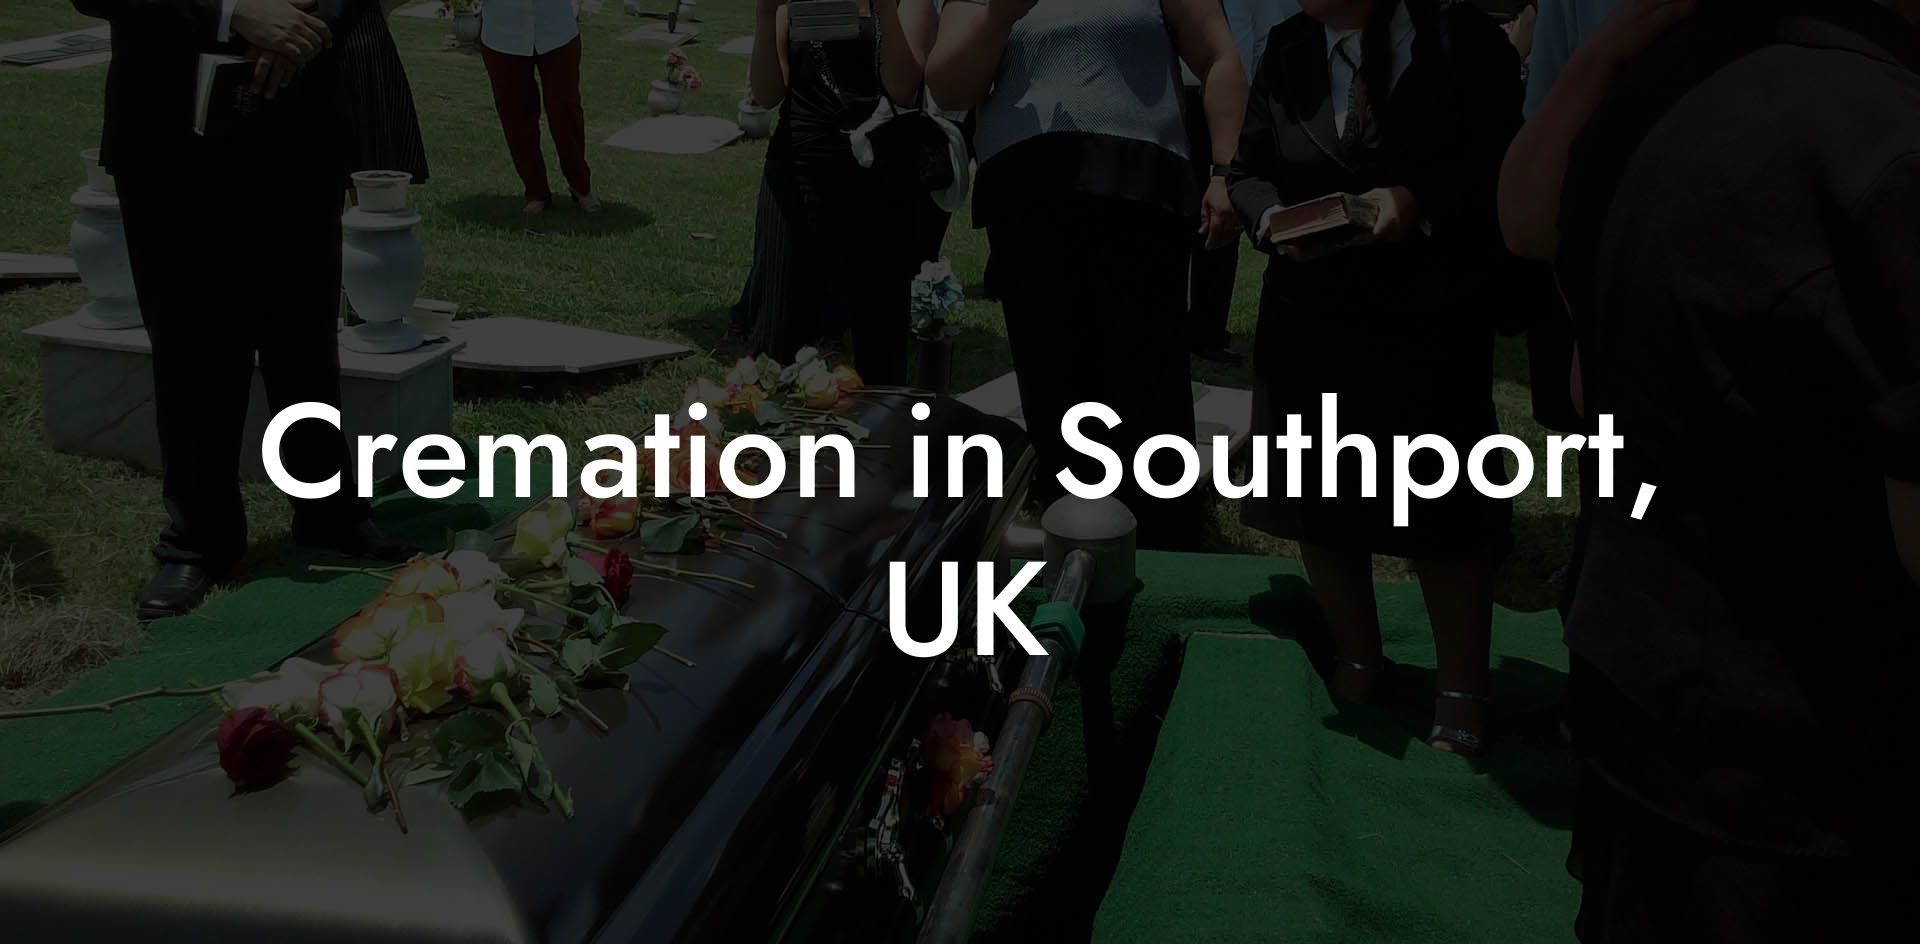 Cremation in Southport, UK